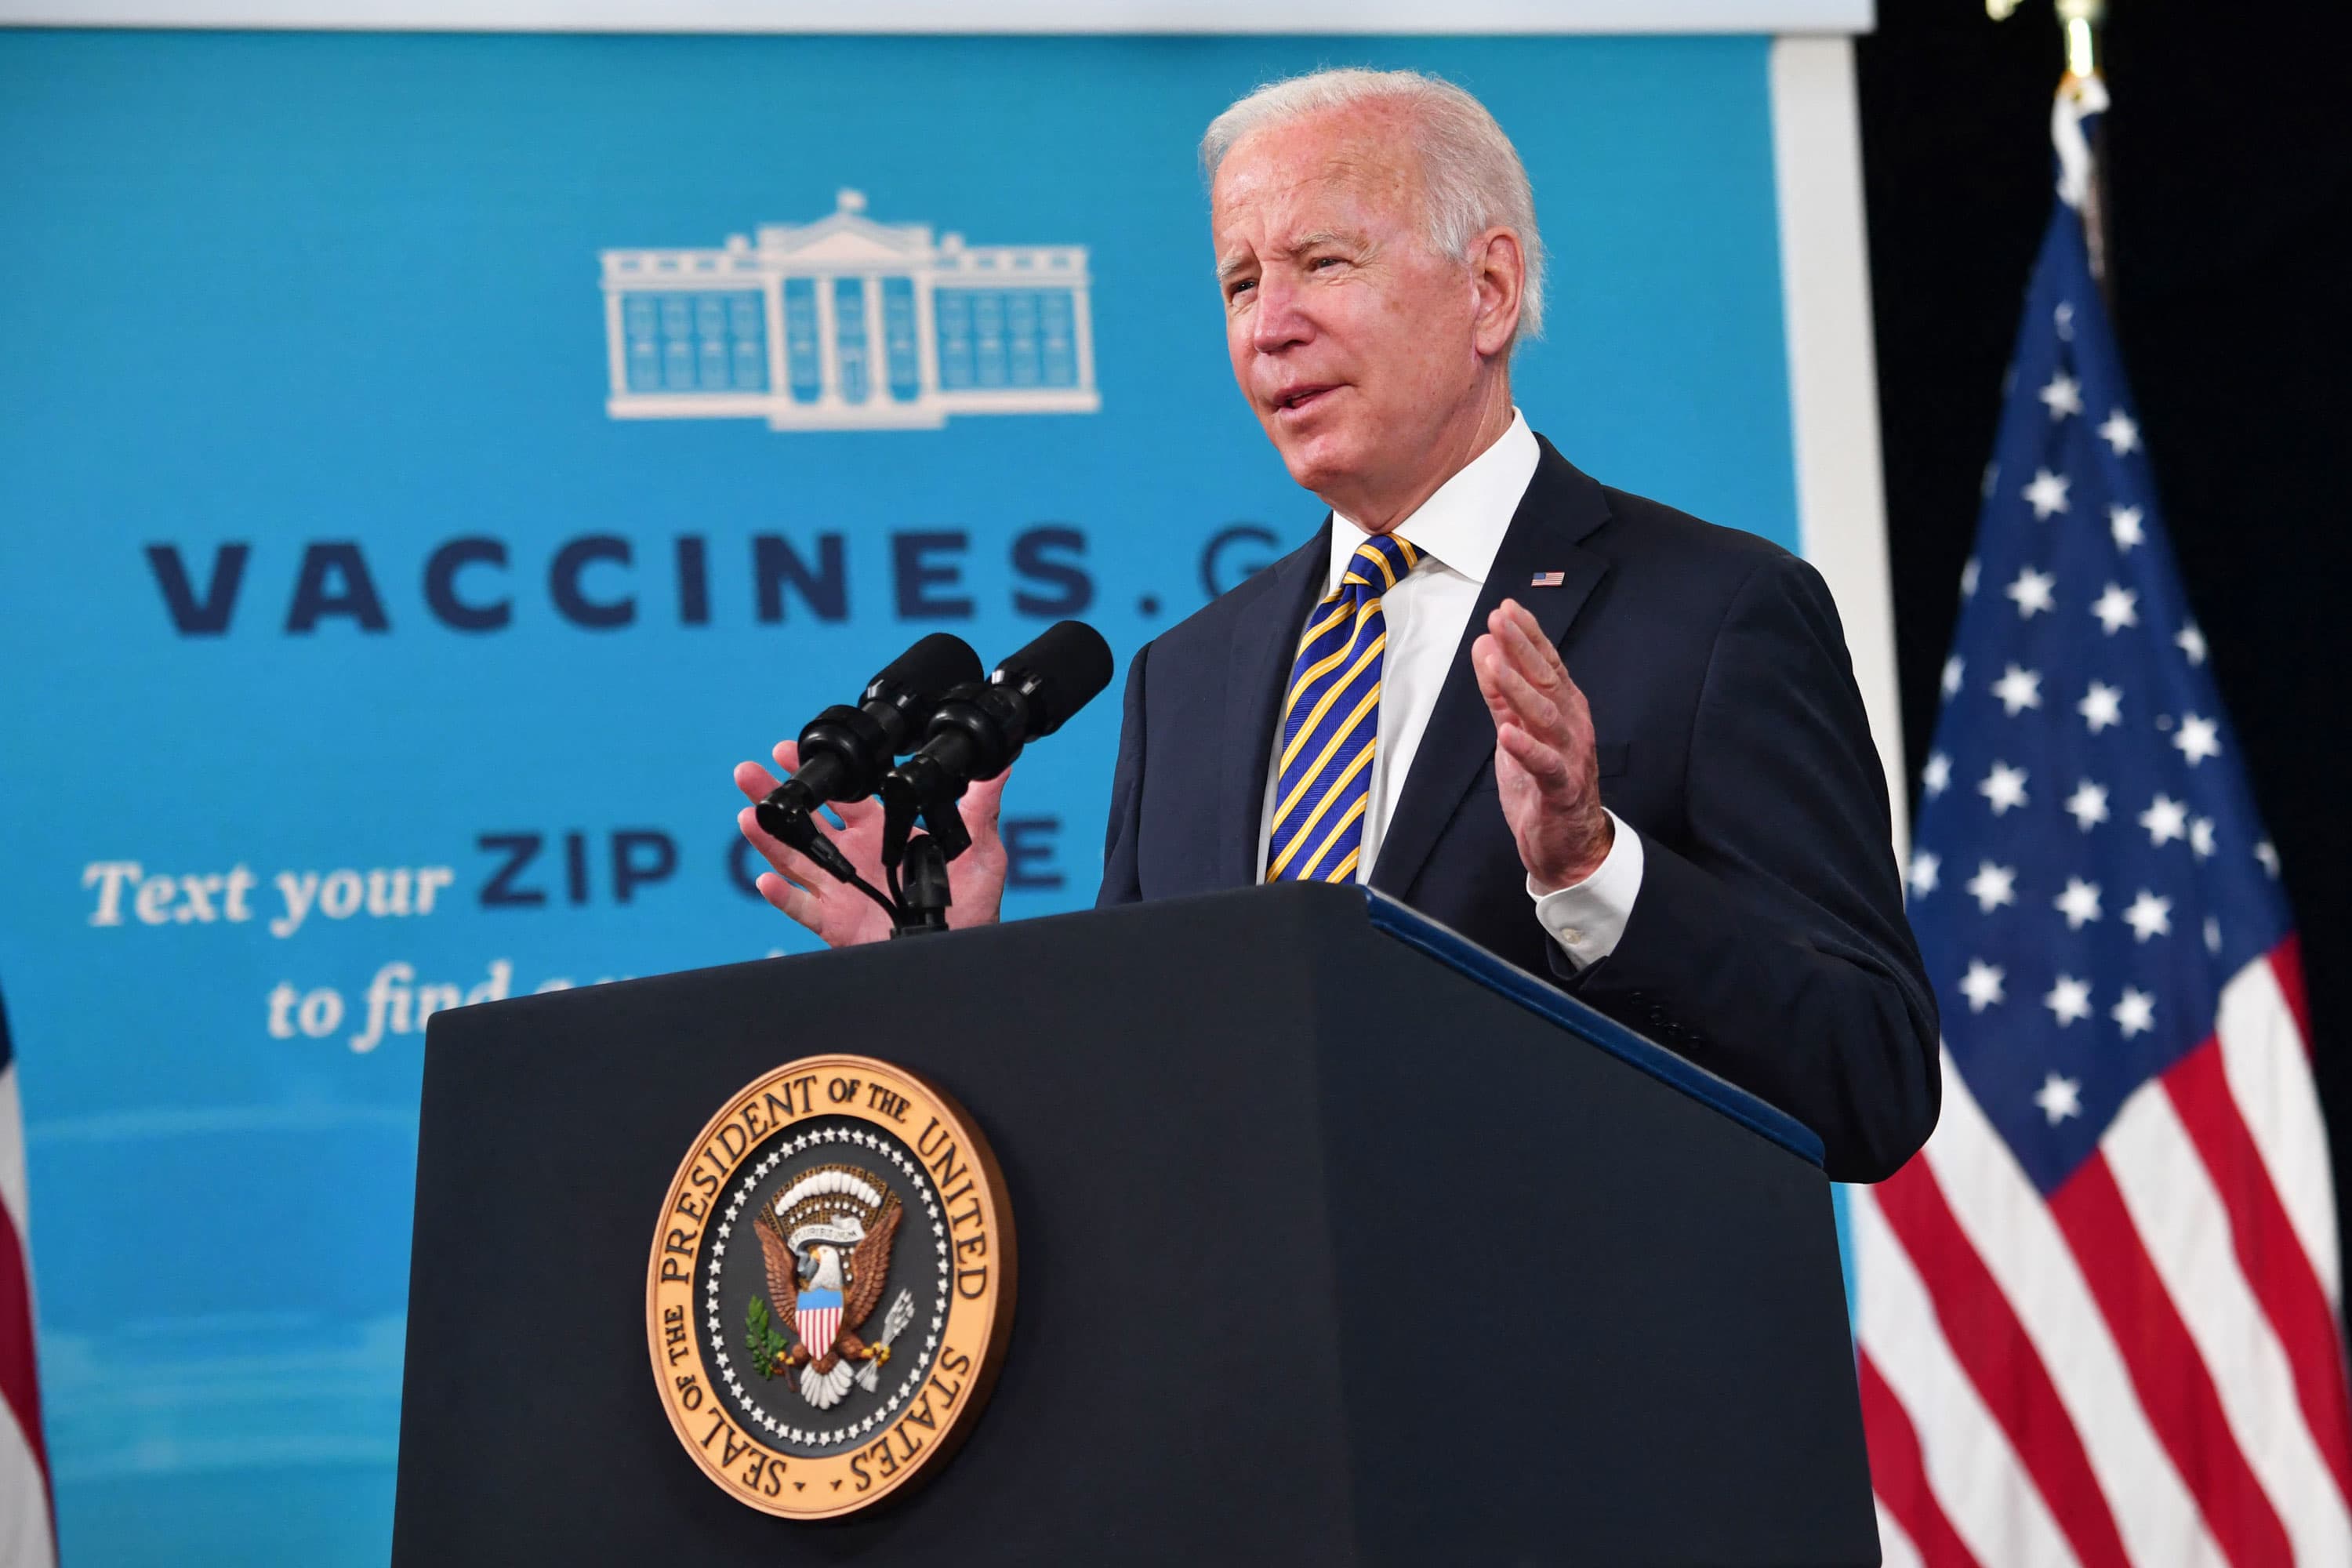 Businesses ask White House to delay Biden Covid vaccine mandate until after holidays